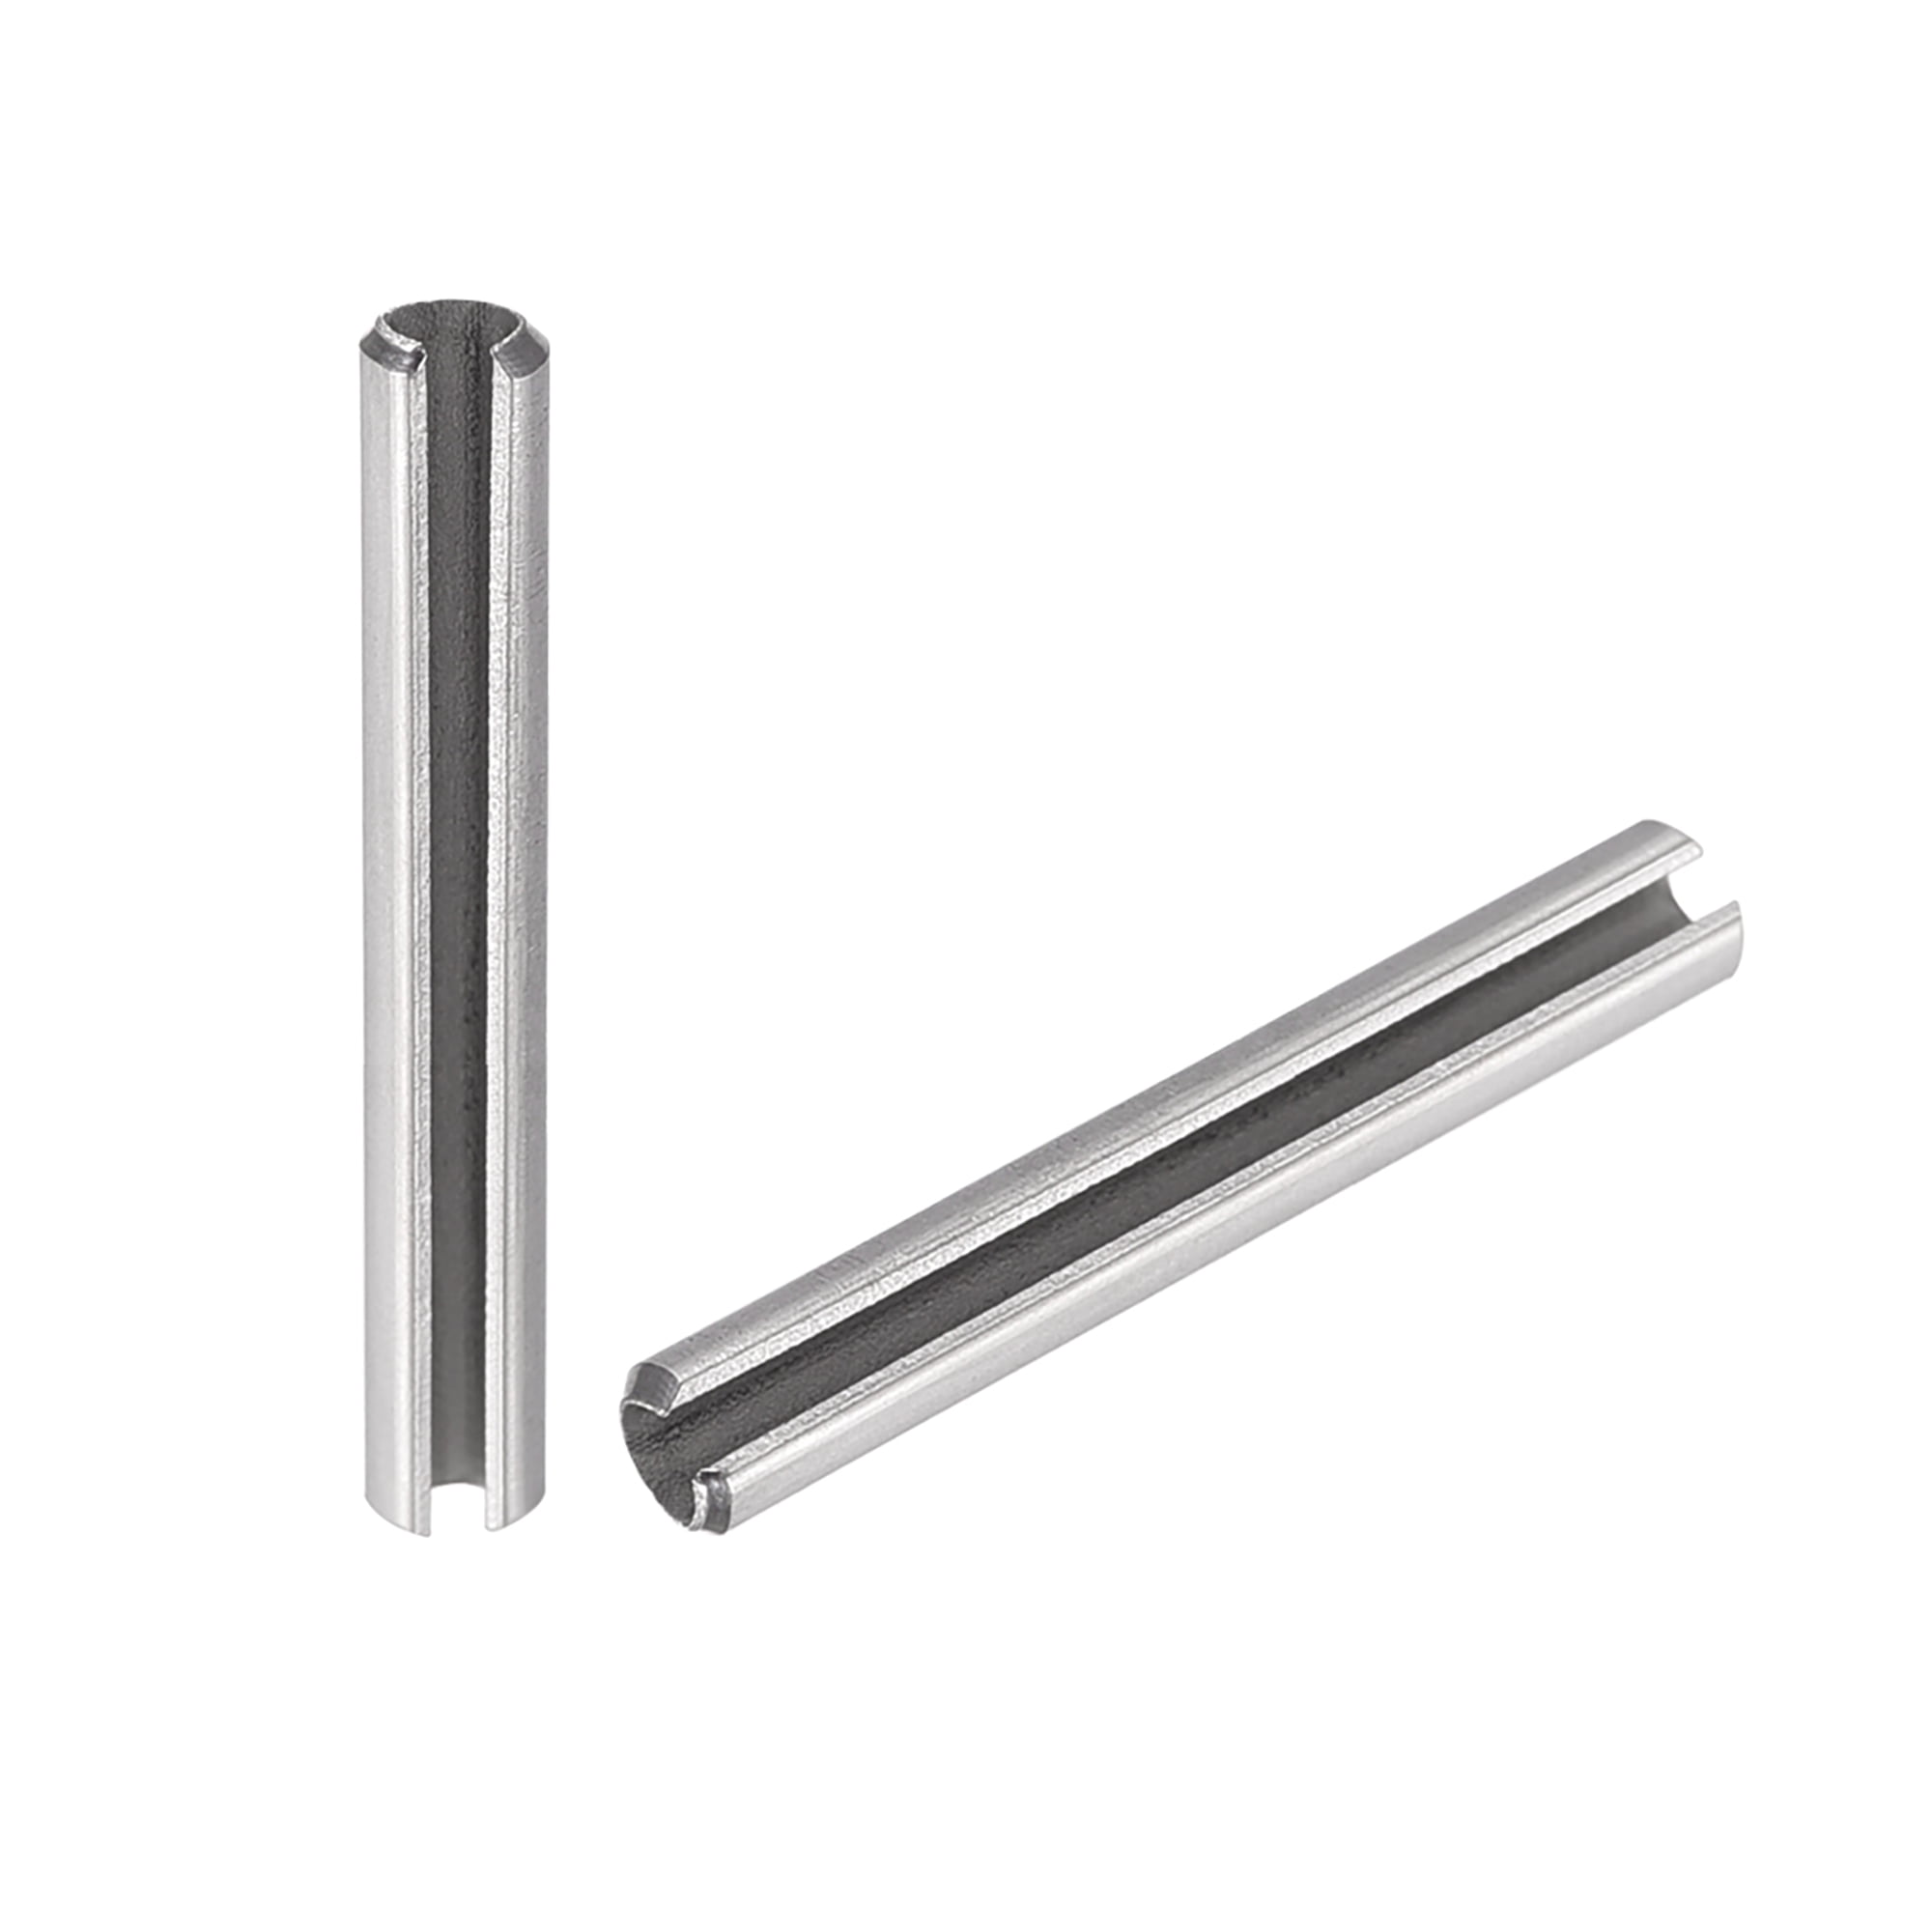 Slotted Spring Pin M25 X 25mm 304 Stainless Steel Split Spring Roll Dowel Pins Plain Finish